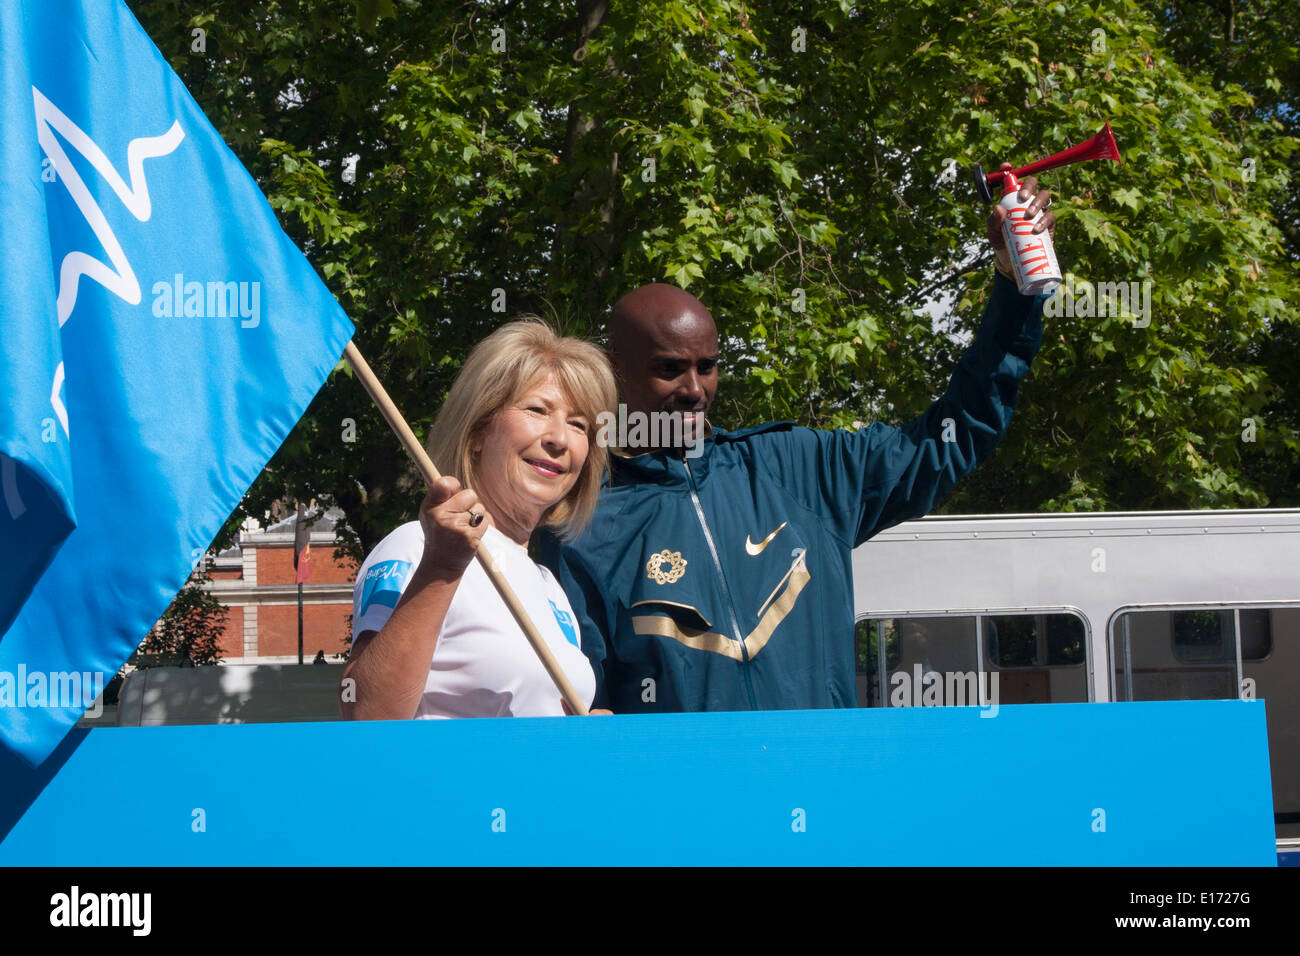 London, UK. 25th May, 2014. Former BBC Royal Correspondent Jenny Bond and Olympic long distance medalist Mo Farrah pose at the start of the BUP 10km run in London. Credit:  Paul Davey/Alamy Live News Stock Photo